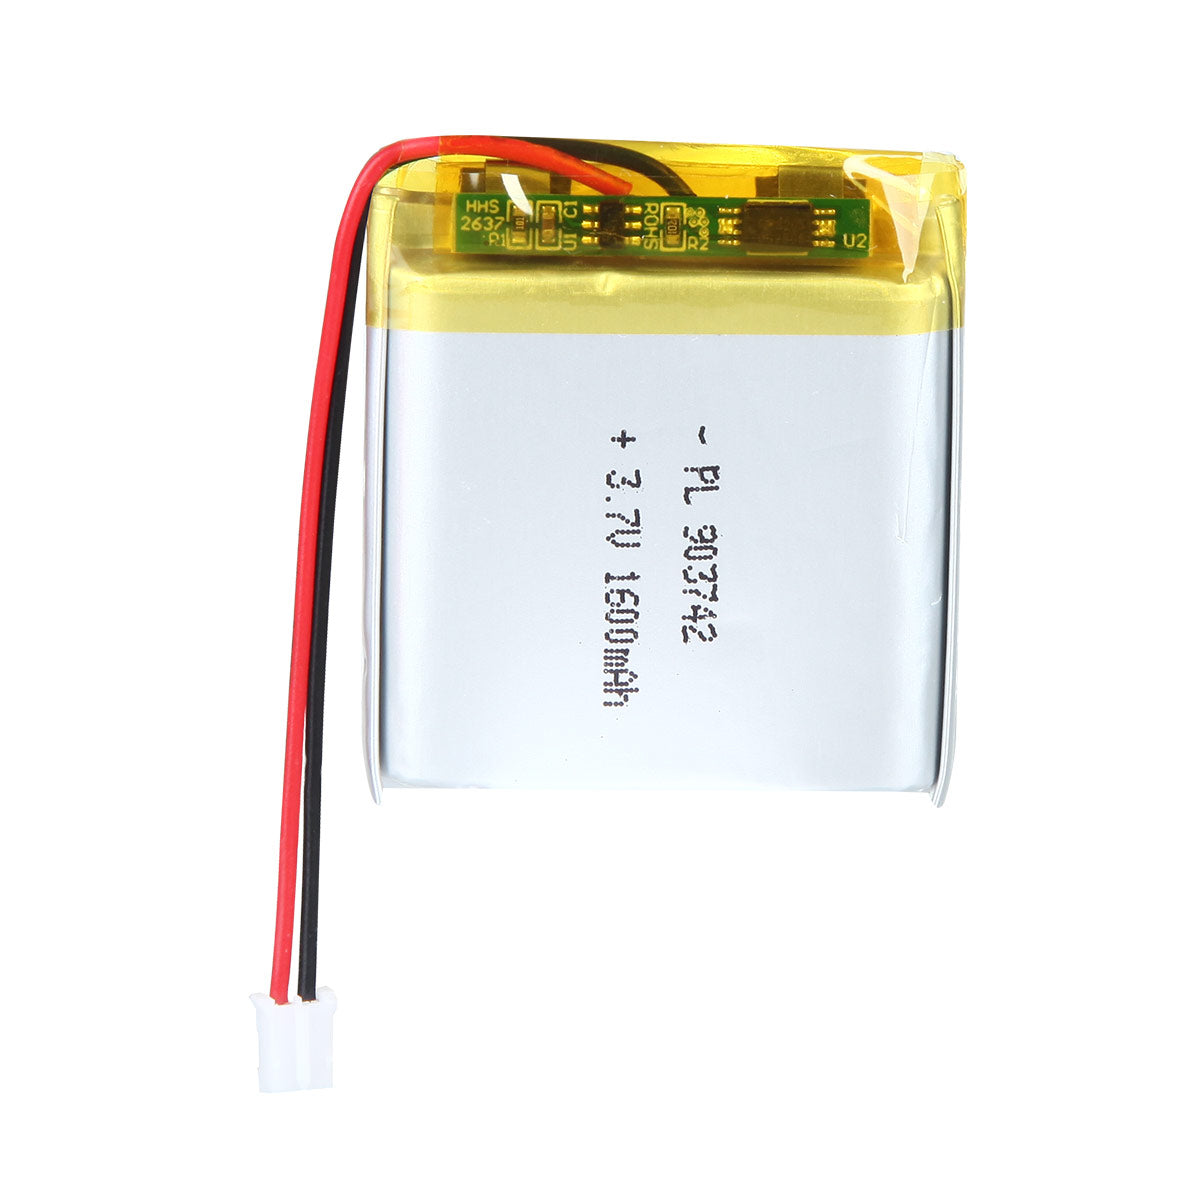 YDL 3.7V 1600mAh 903742 Rechargeable Lithium Polymer Battery